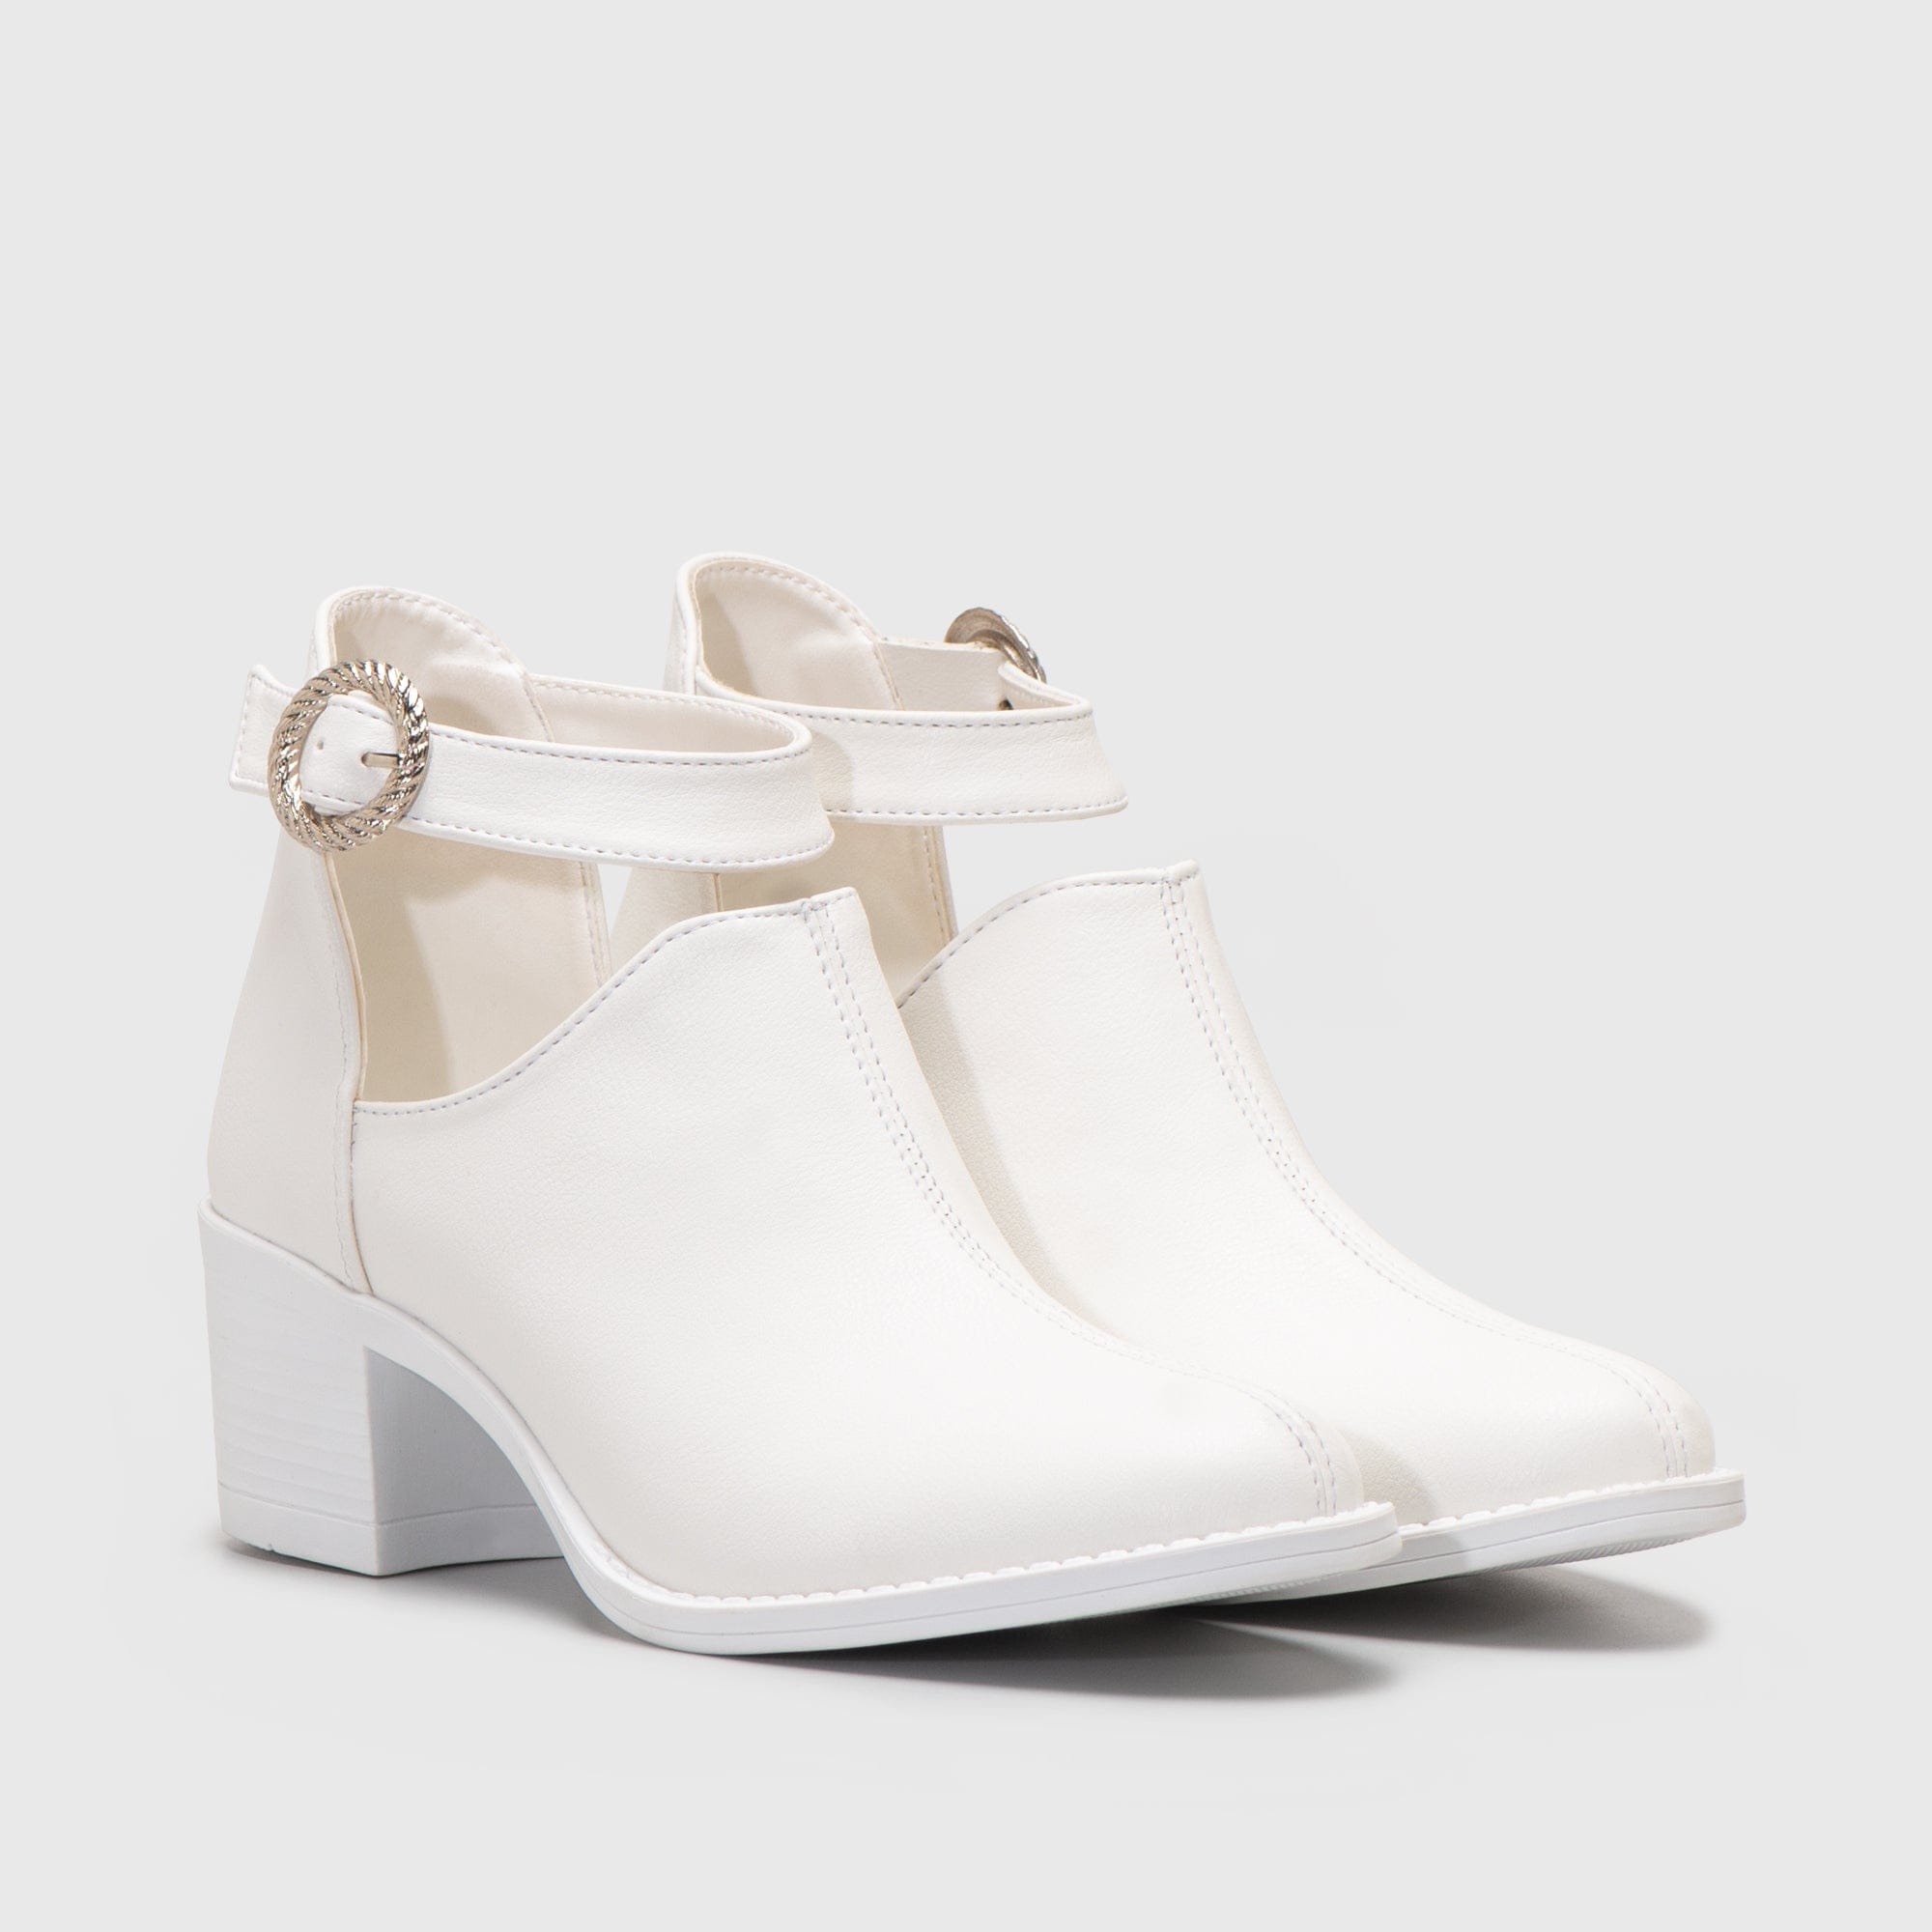 Adorable Projects Official Boots 43 / White Lodka Boots White Heels